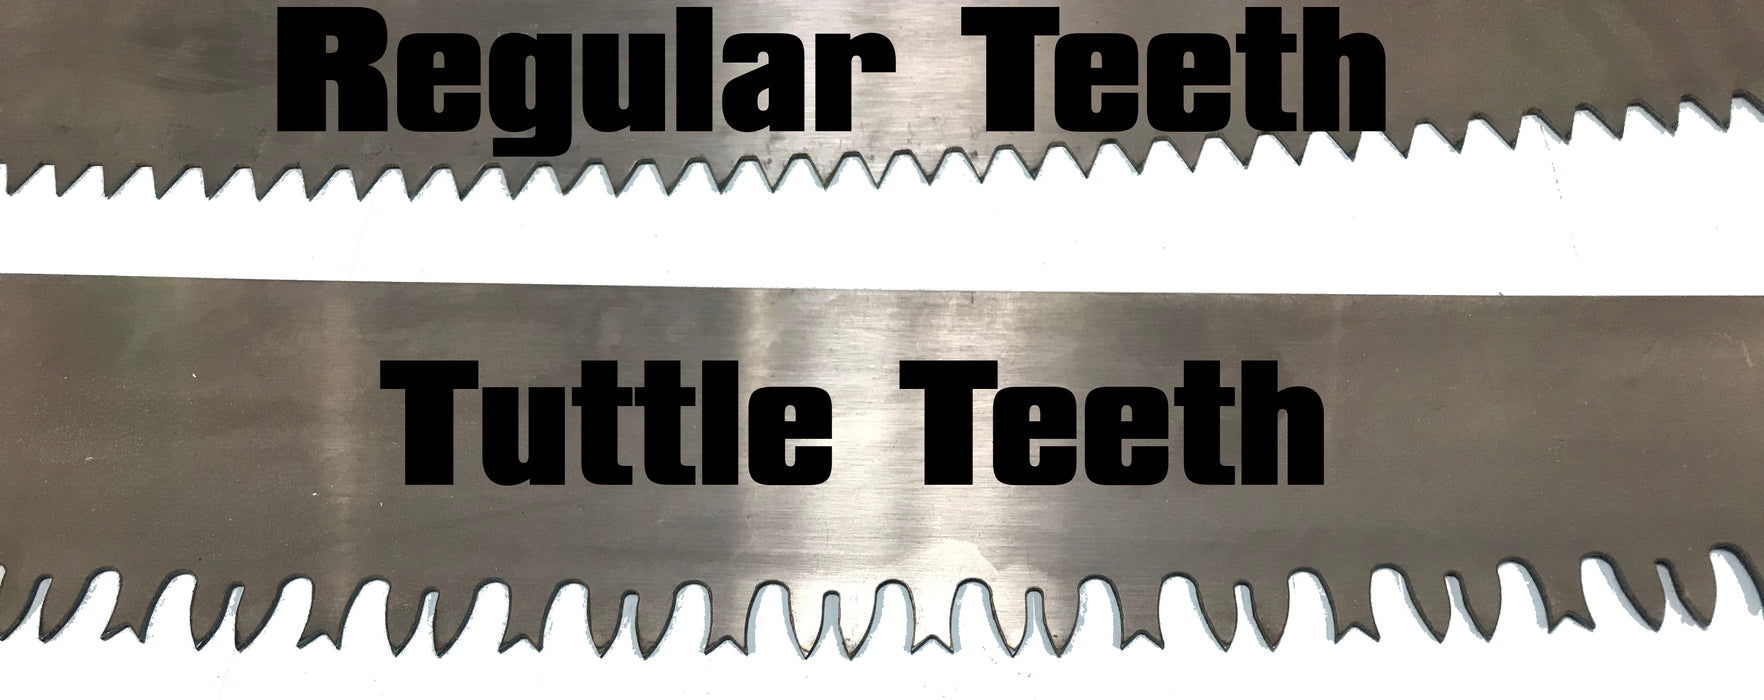 2 - 60" German Made Two-Man Crosscut Saw - Regular Teeth  and Tuttle Tooth